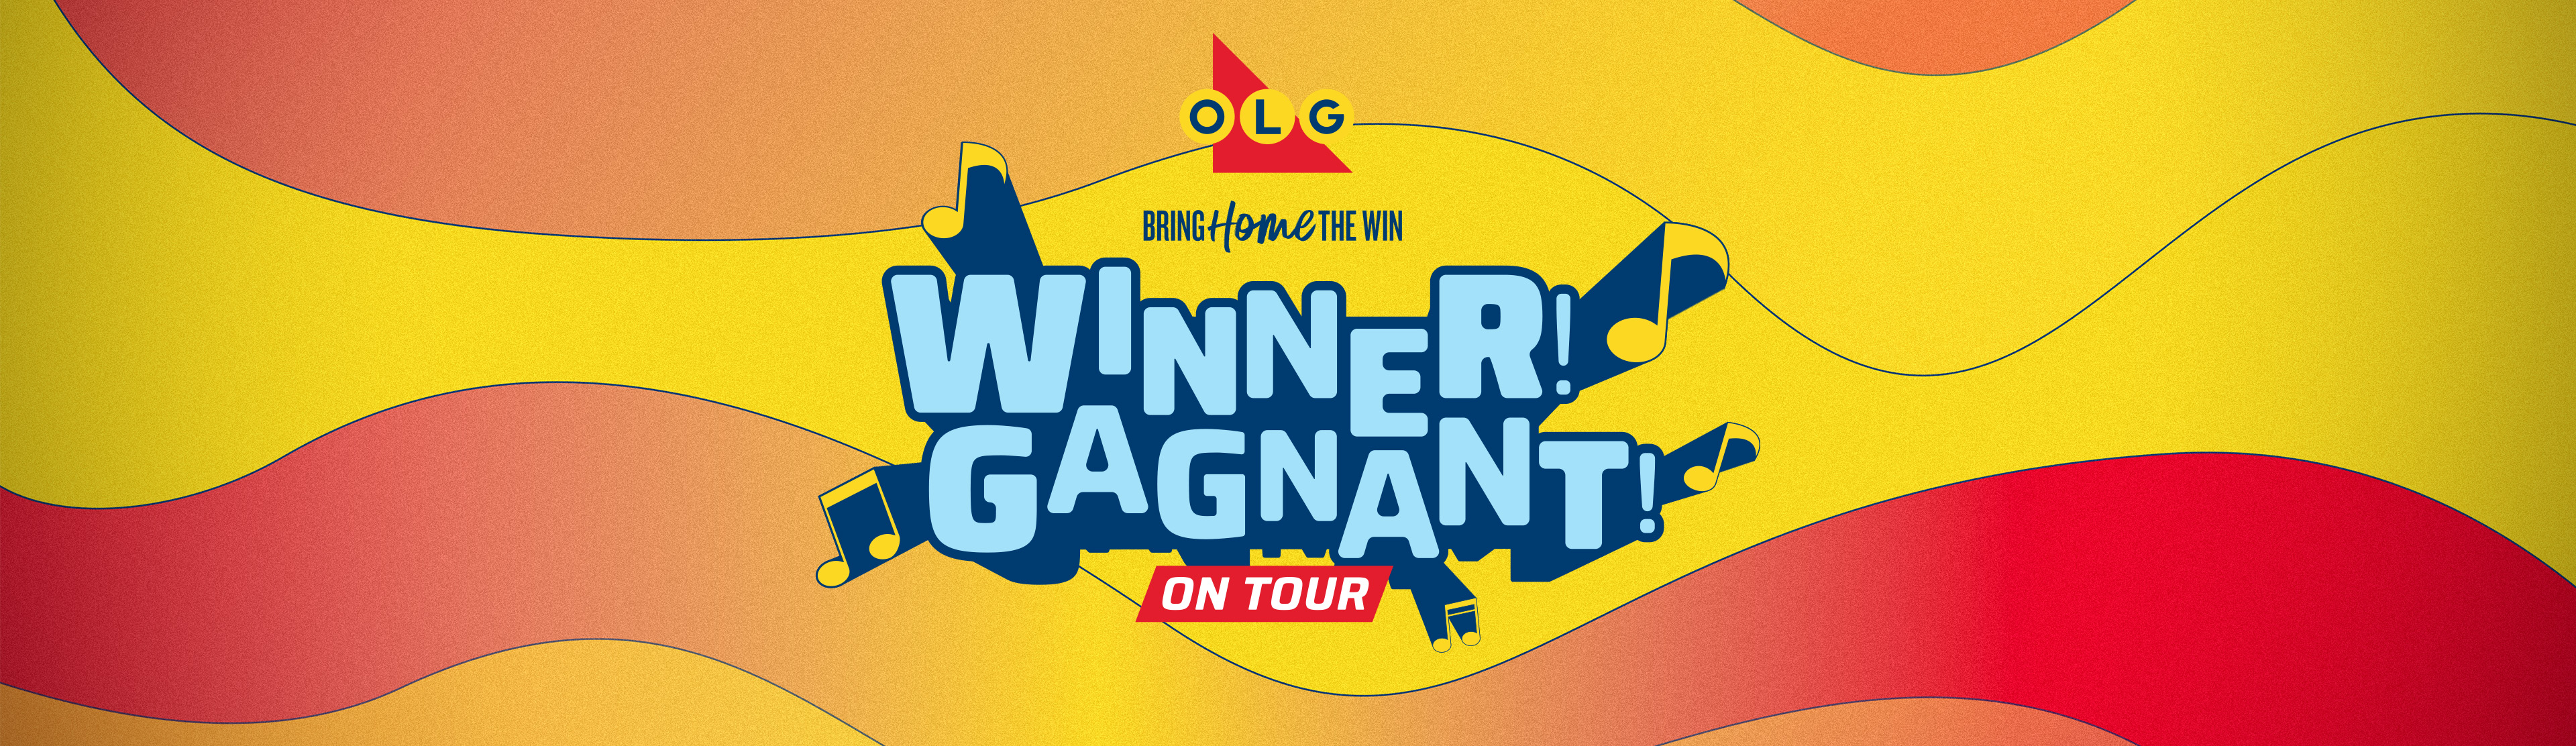 Winner!Gagnant! on Tour: Bring Home the Win Ontario